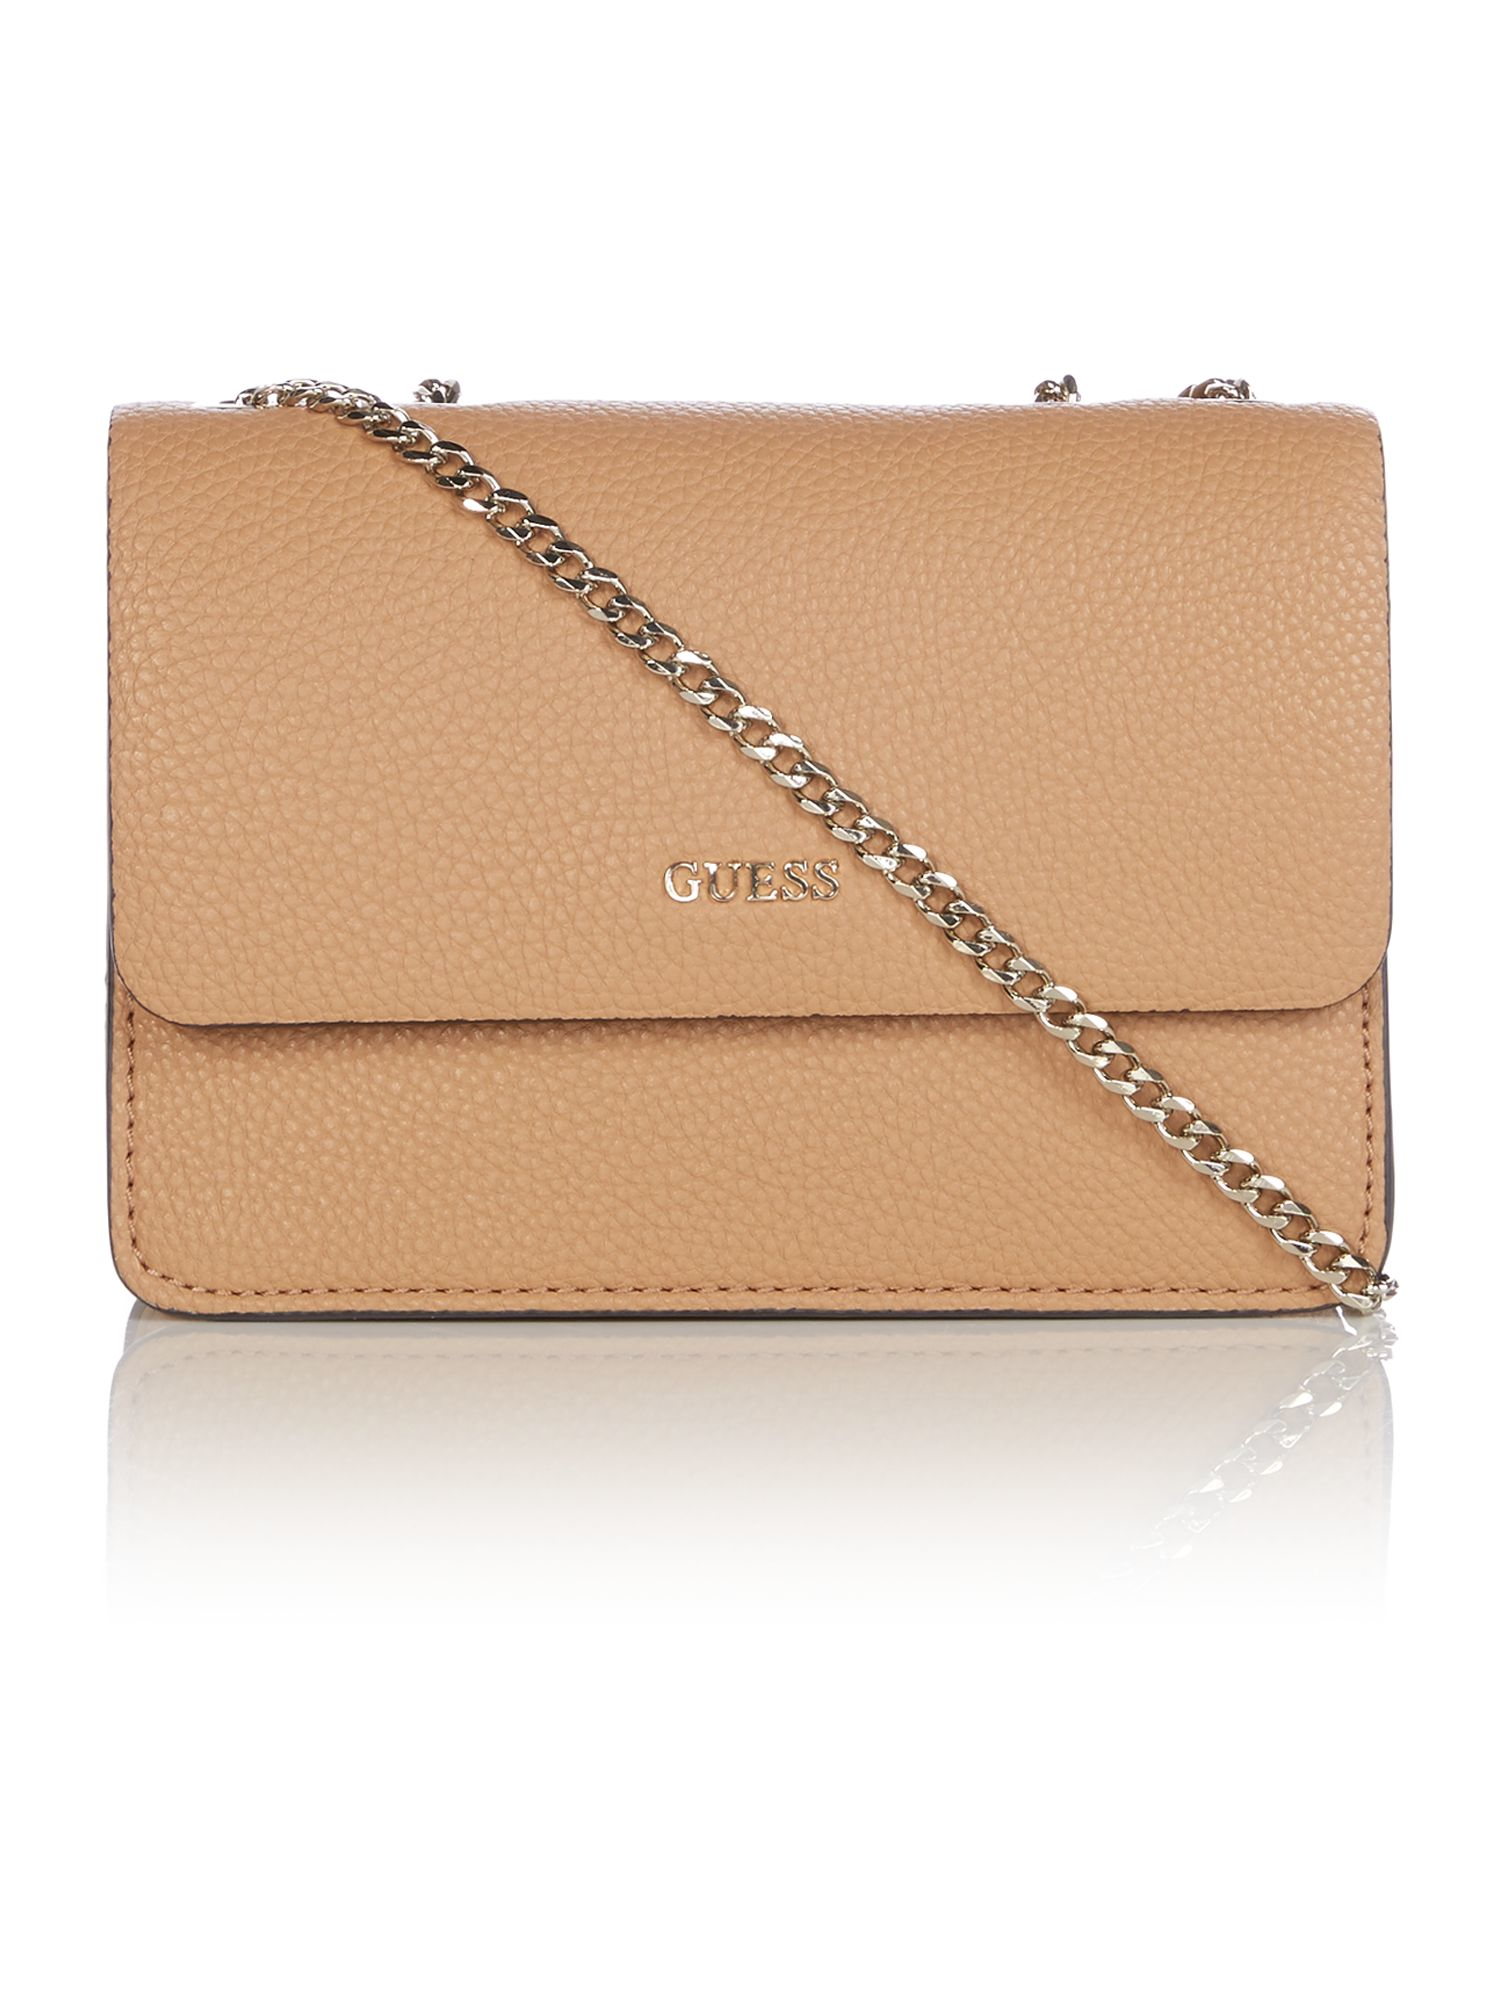 Lyst - Guess Nikki Taupe Chain Flapover Crossbody Bag